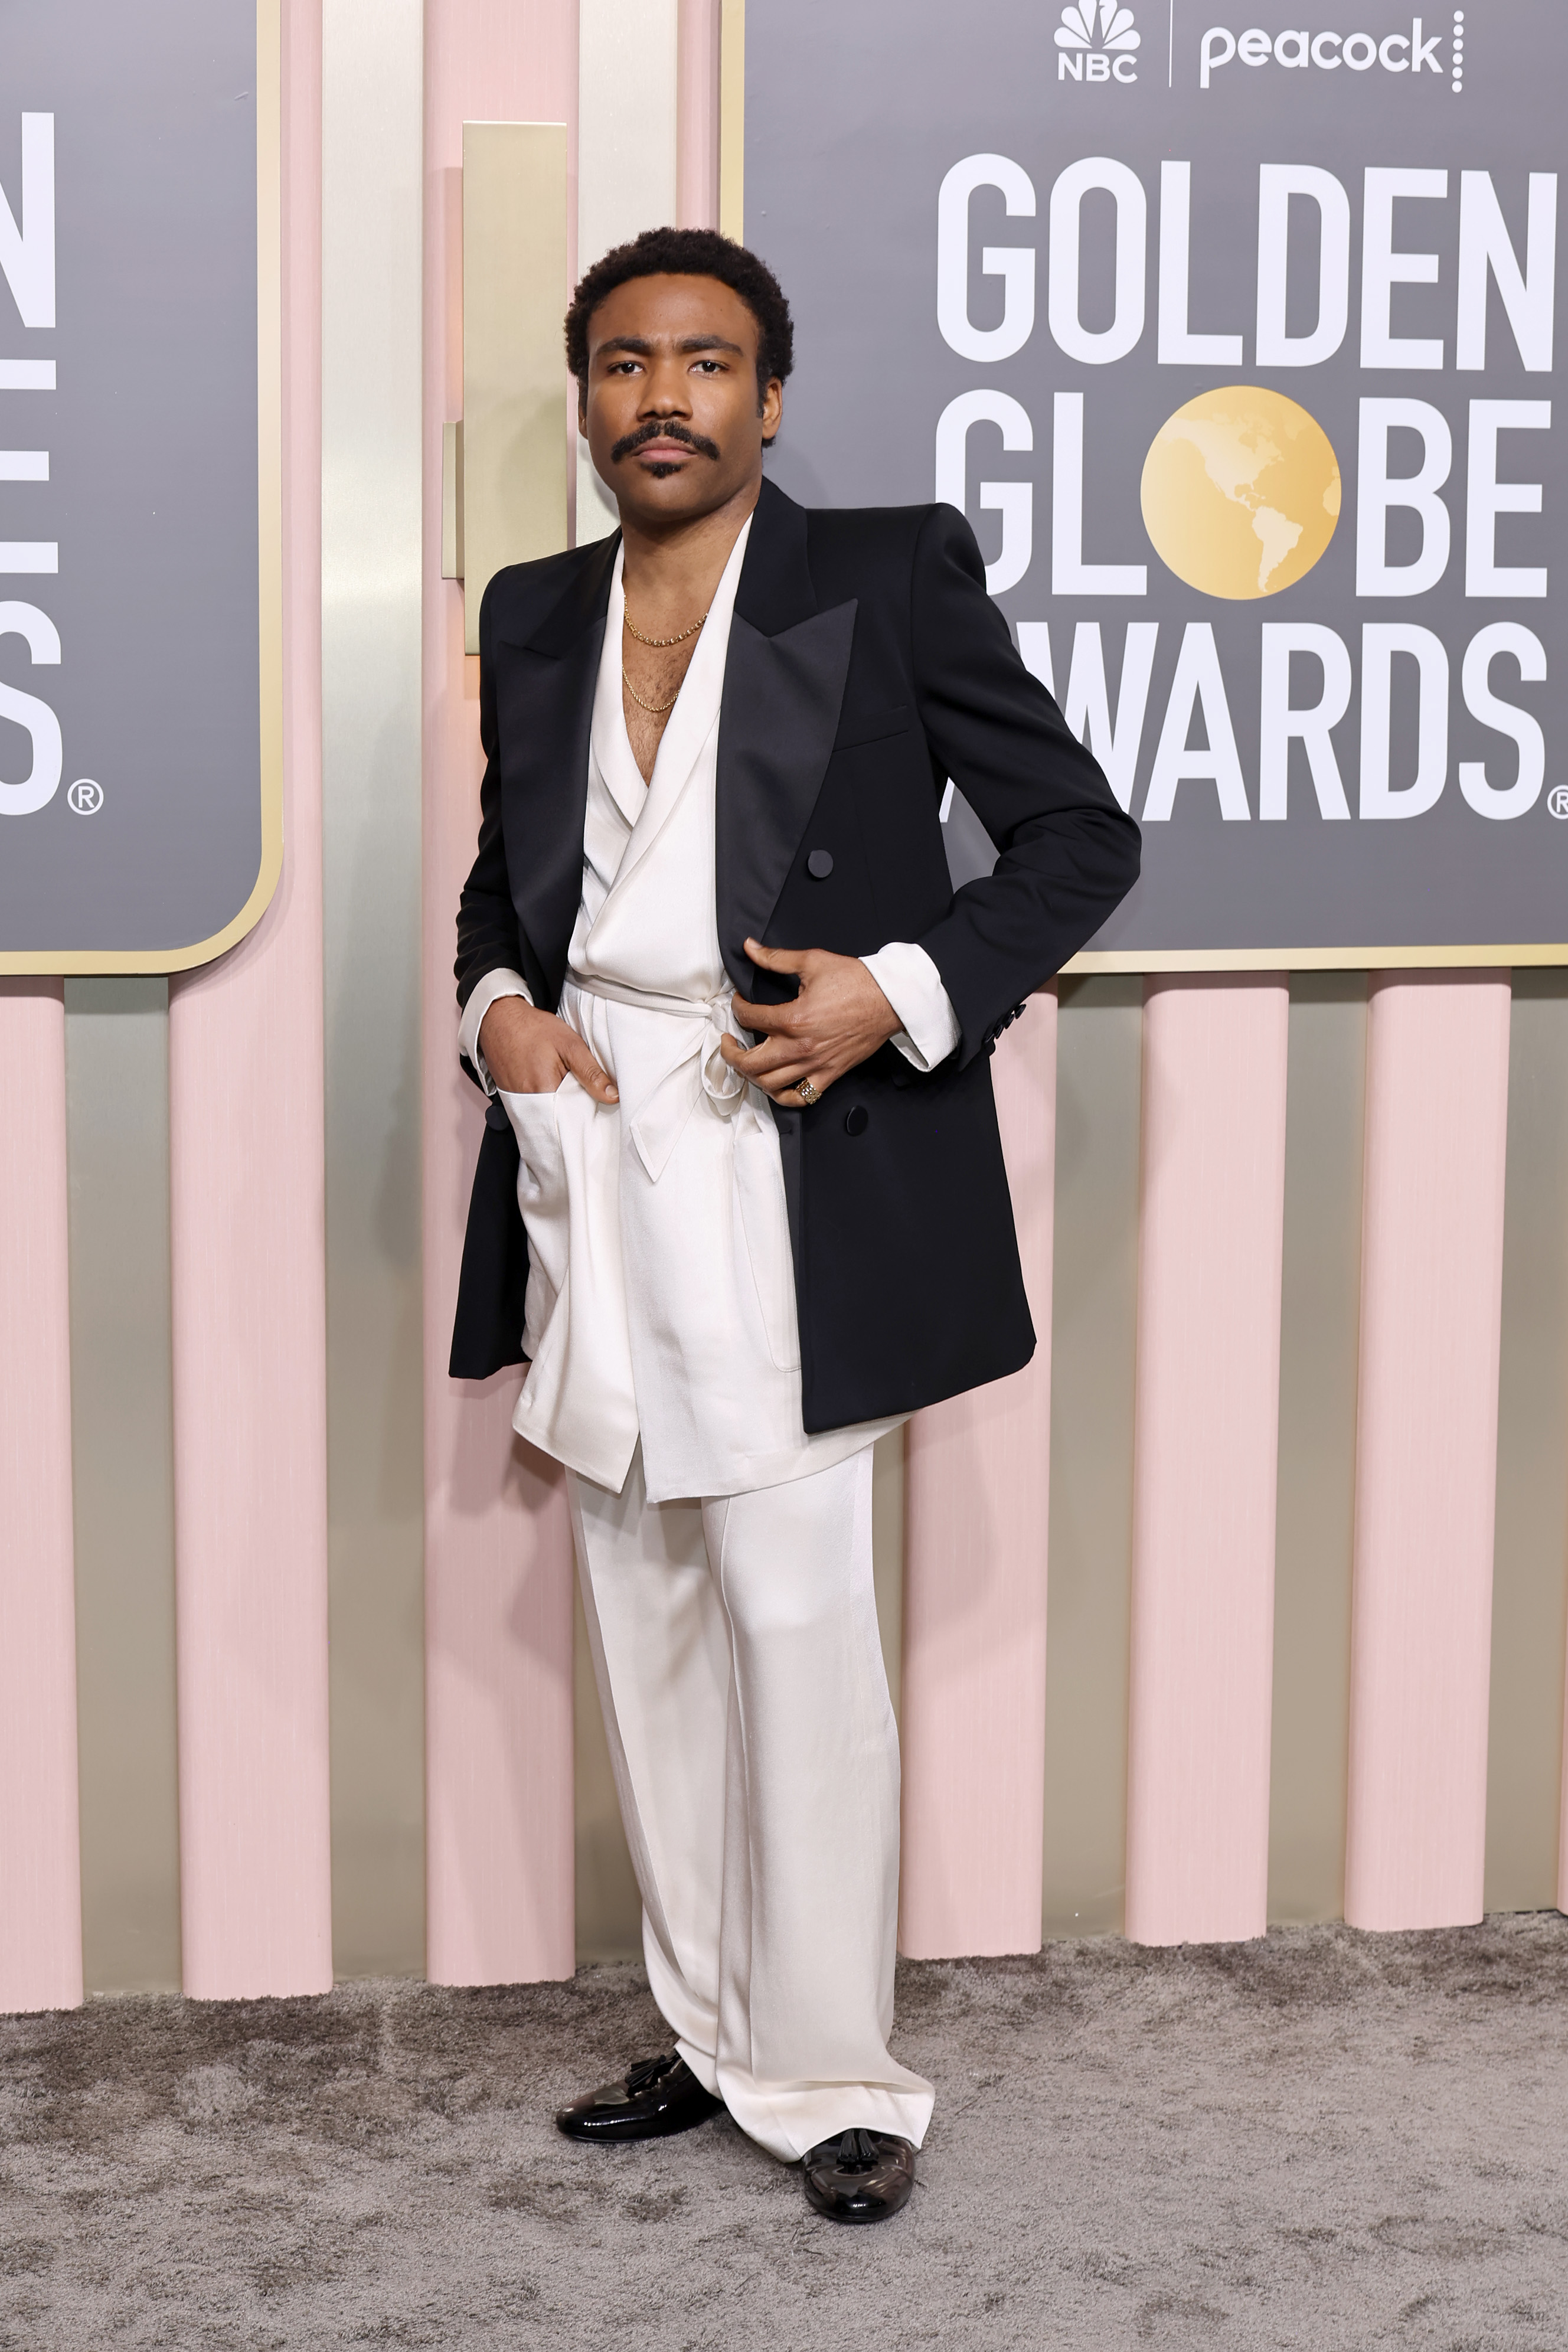 Donald Glover Wears a black jacket and white suit at the billboard awards